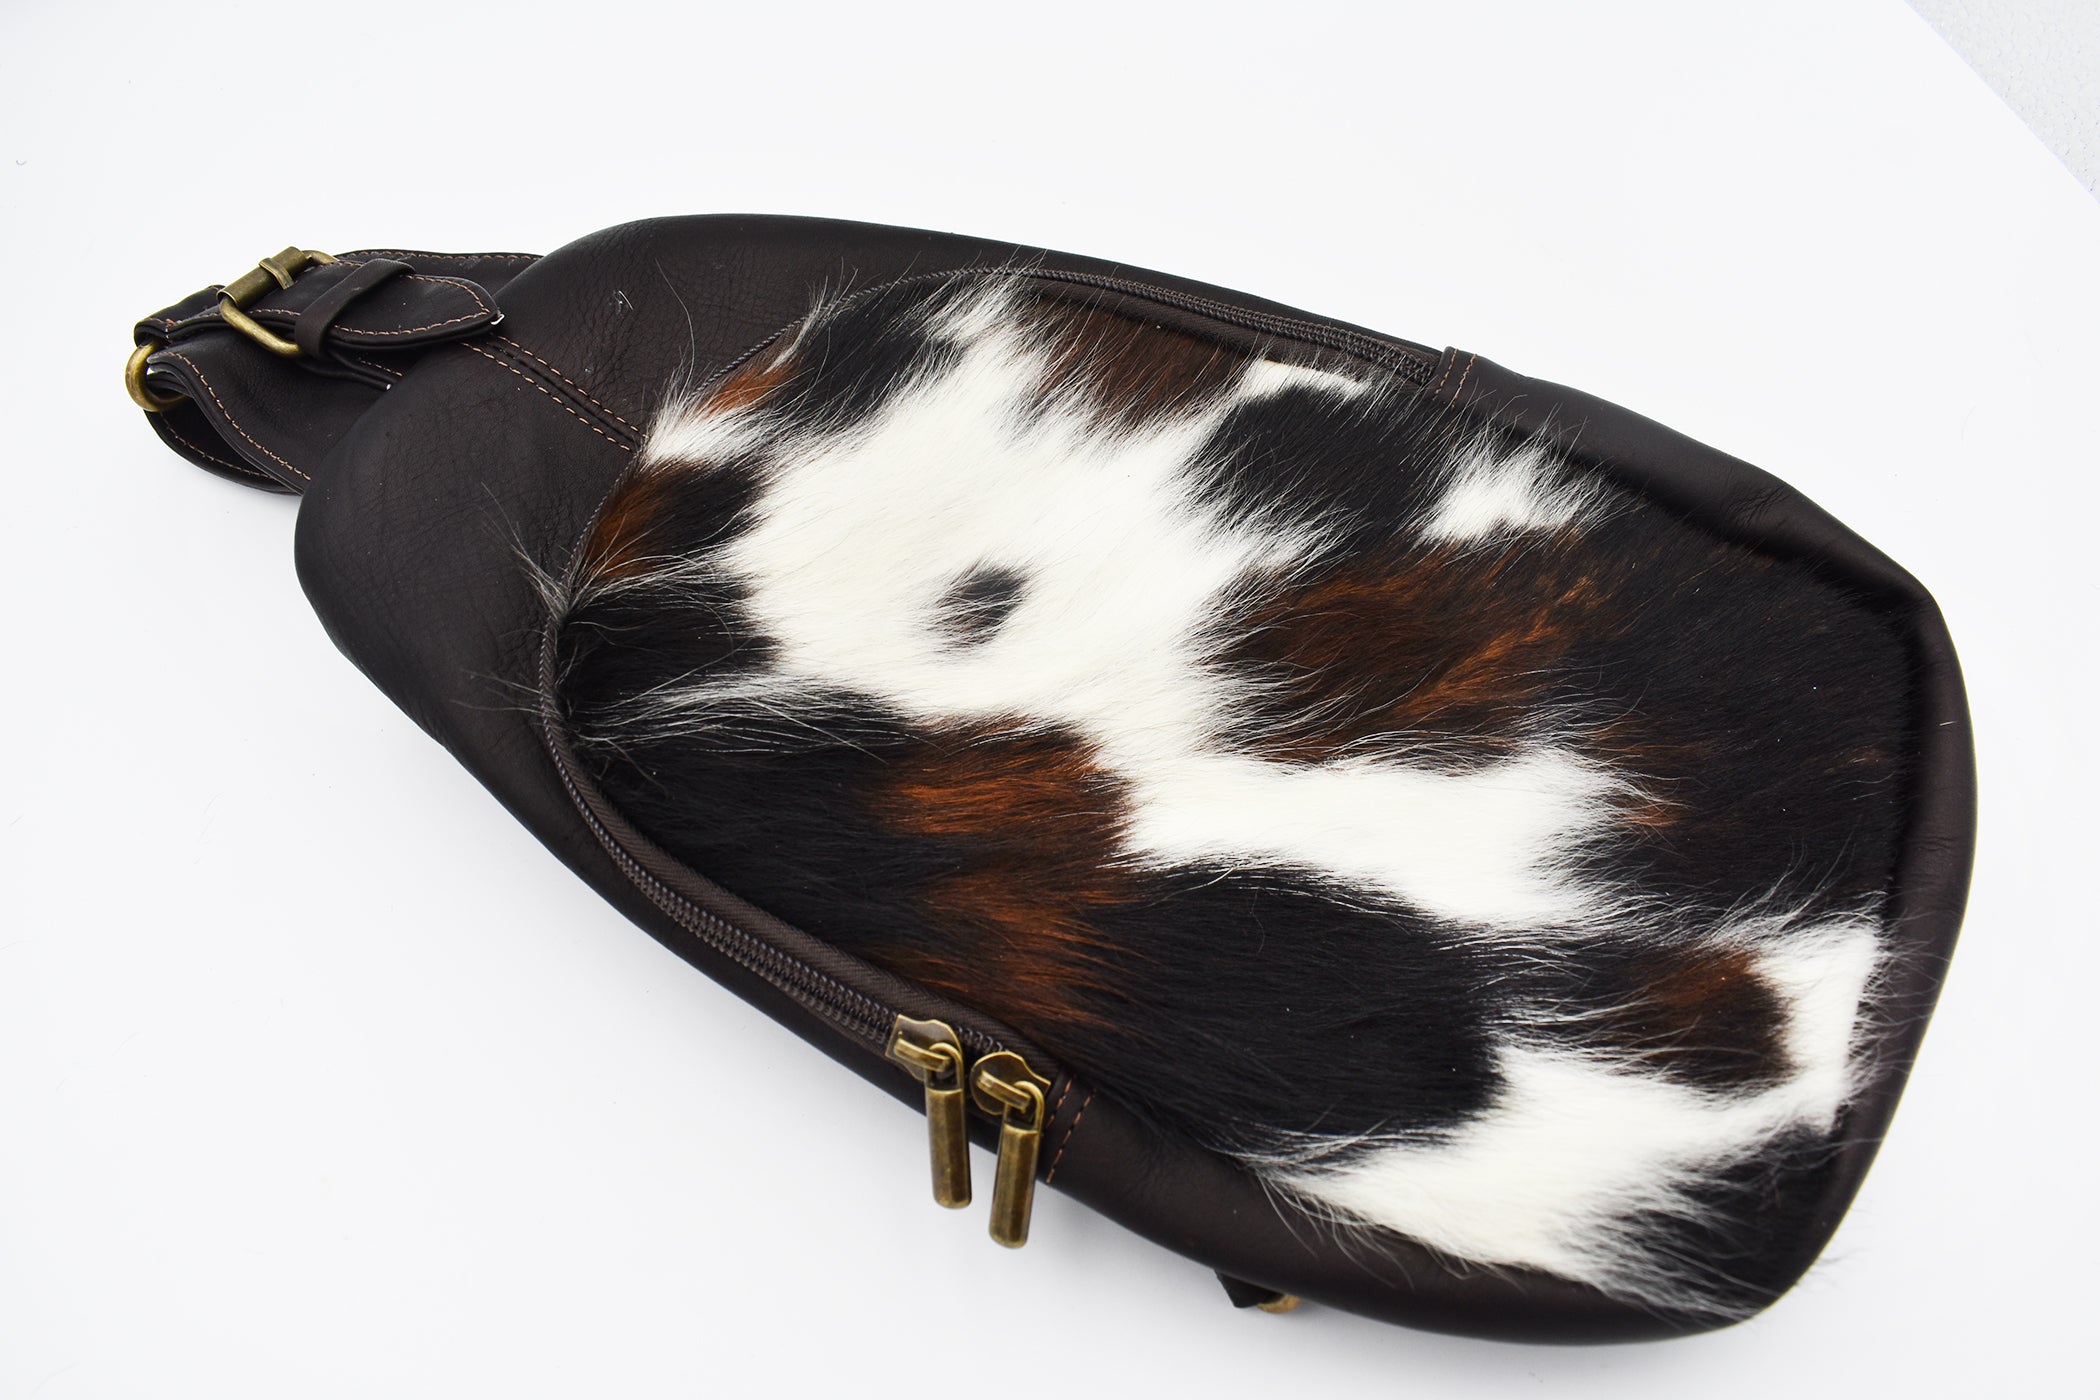 Sling, Off Shoulder Italian Leather with Brown and White Fur Cowhide front Bag